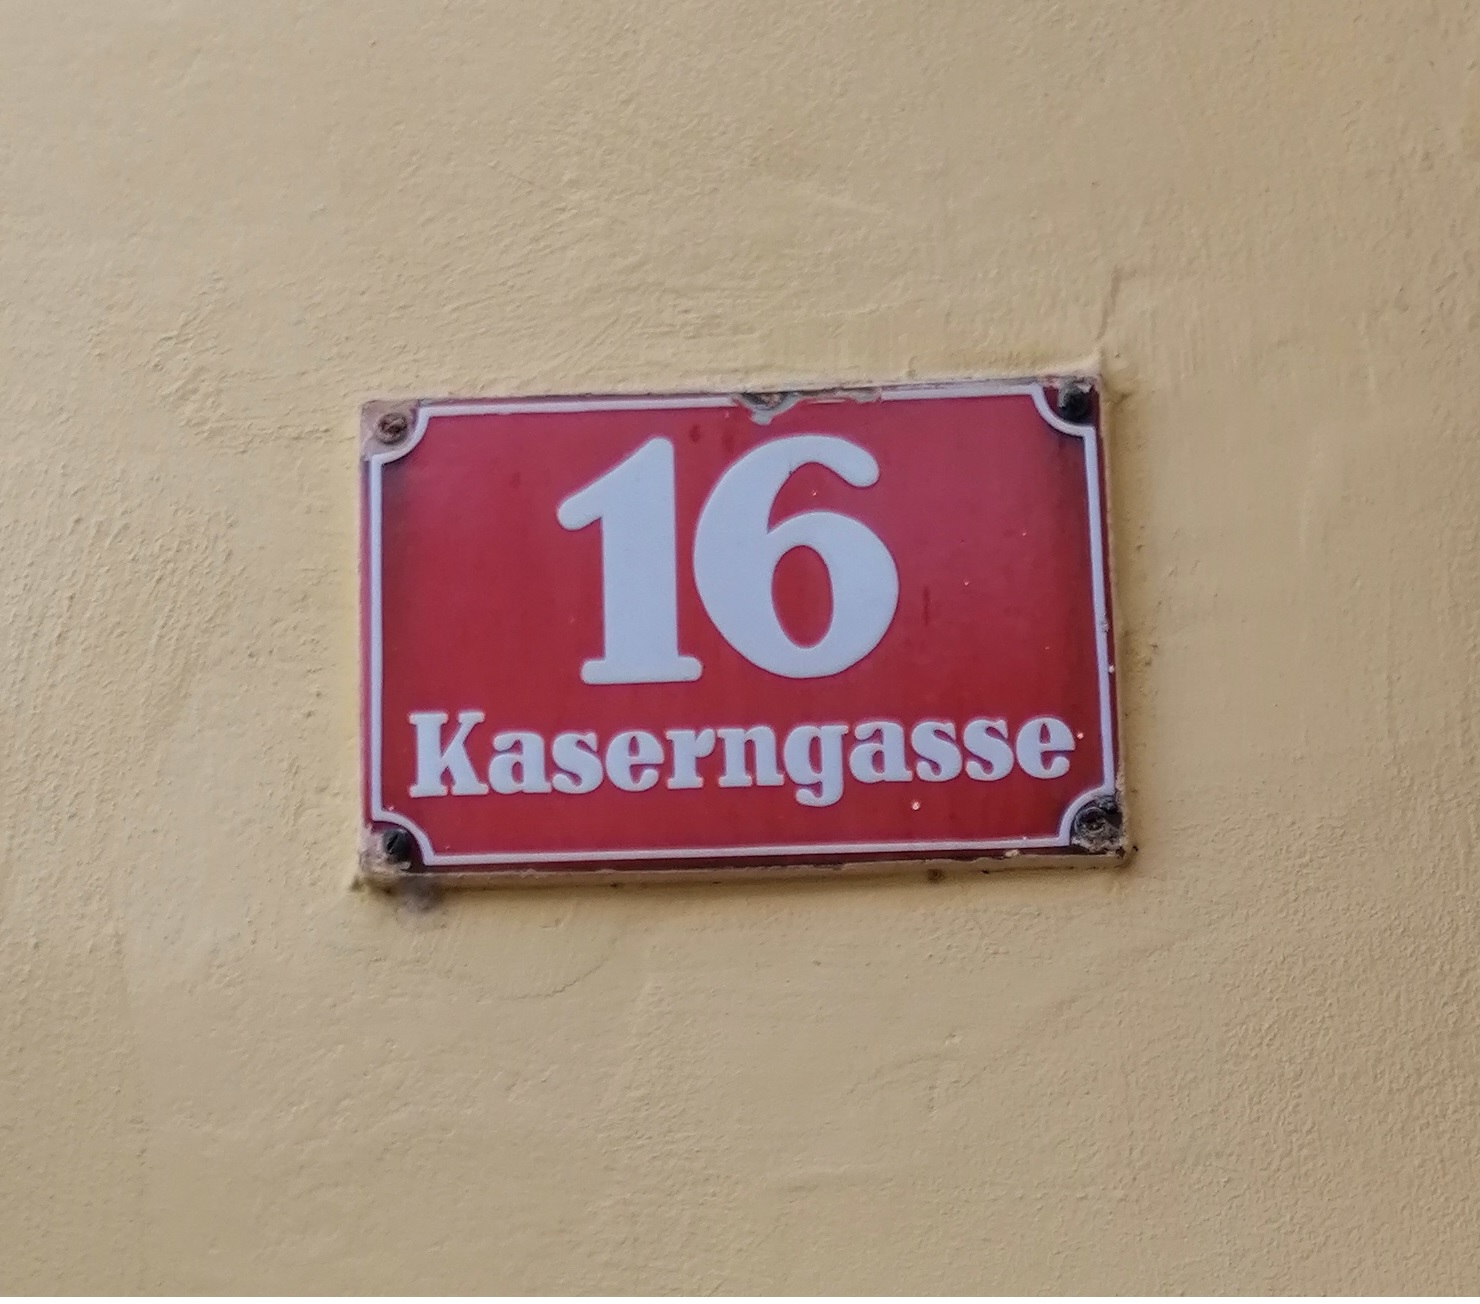 Read more about the article Aus Herrengasse wird Kaserngasse